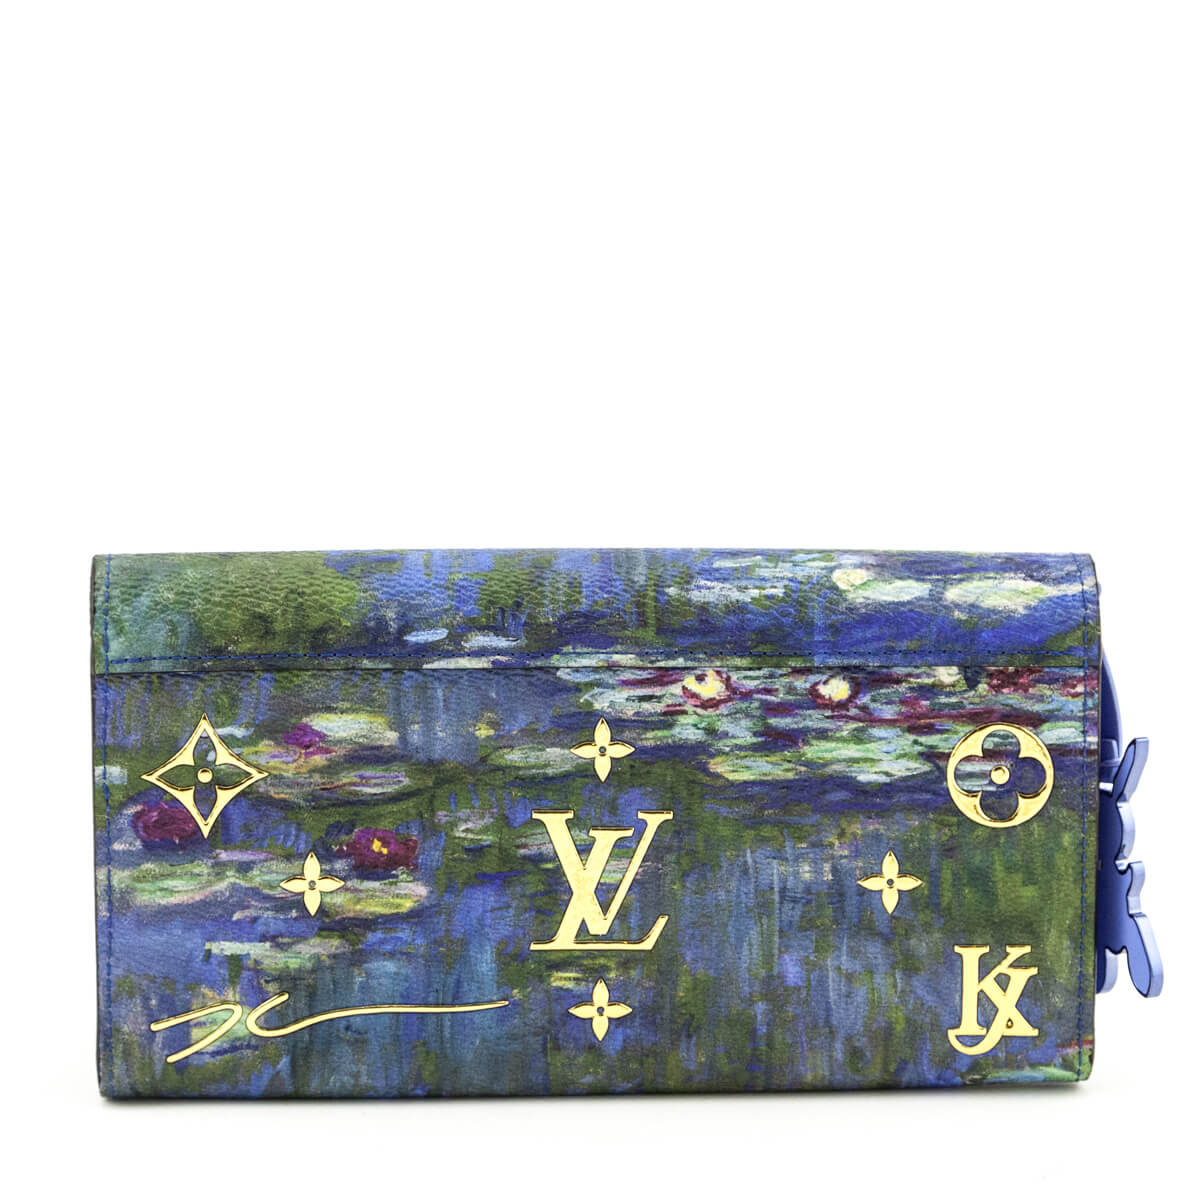 W2C) Louis Vuitton 'Cloud' Wallets? Have these even been released yet? :  r/DesignerReps